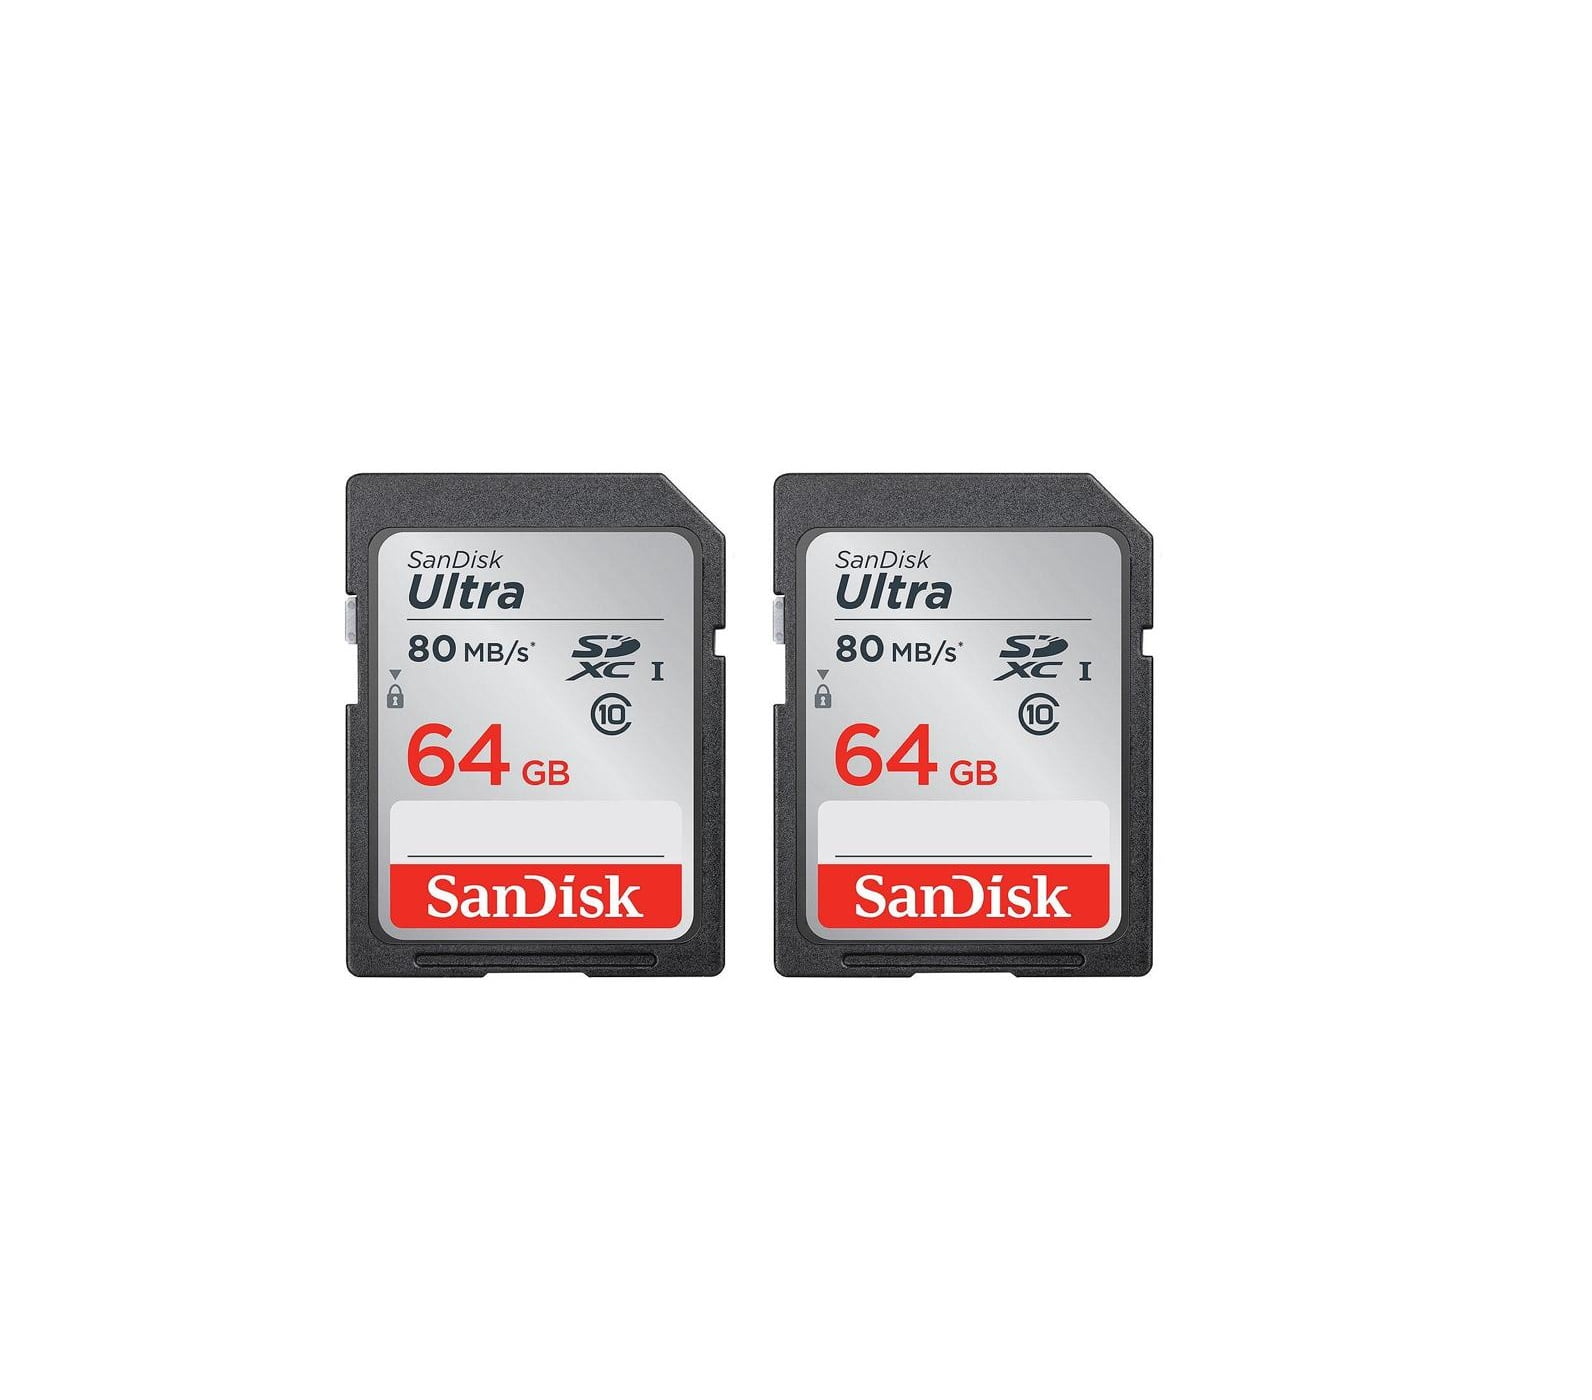 sdhc 80 - Class 10/uhs-i Sandisk Ultra 16 Gb Secure Digital High Capacity 